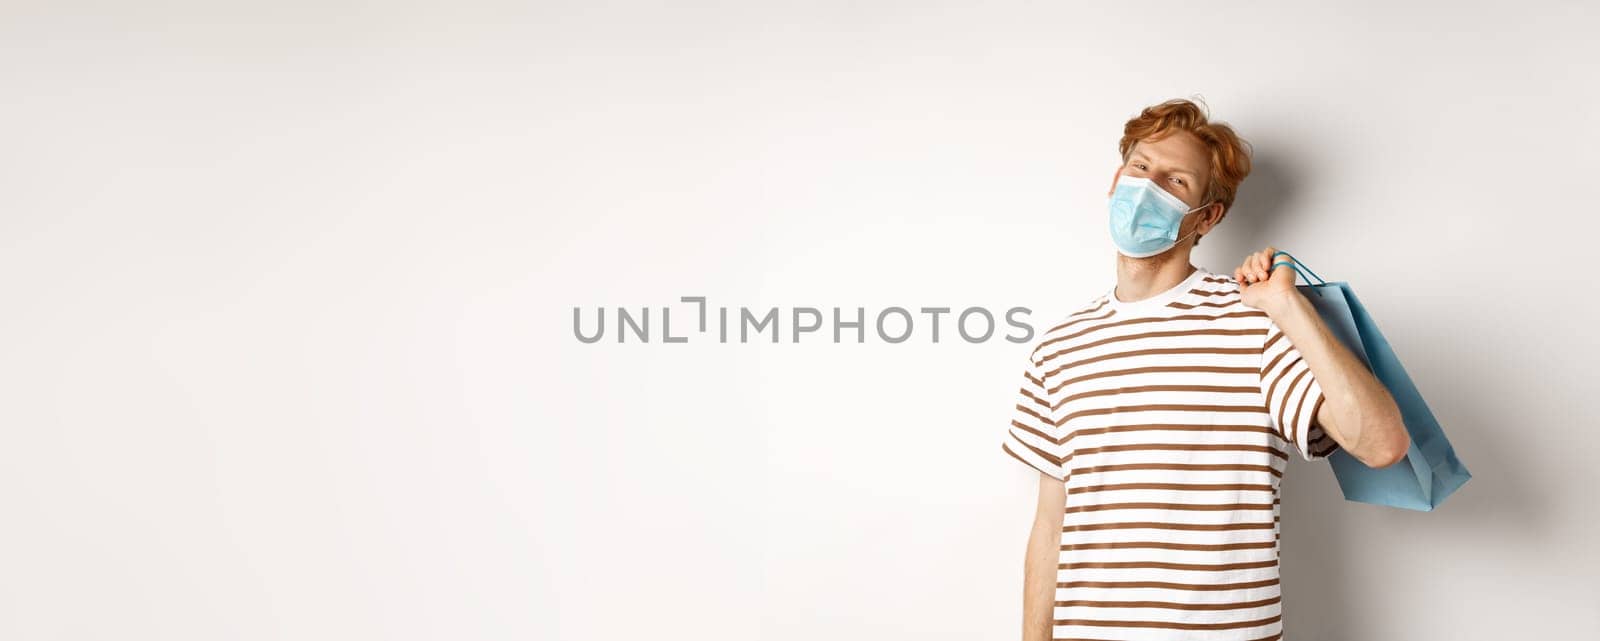 Concept of covid-19 and shopping. Satisfied young man looking pleased after shopping, wearing face mask, holding paper bag and smiling, white background.